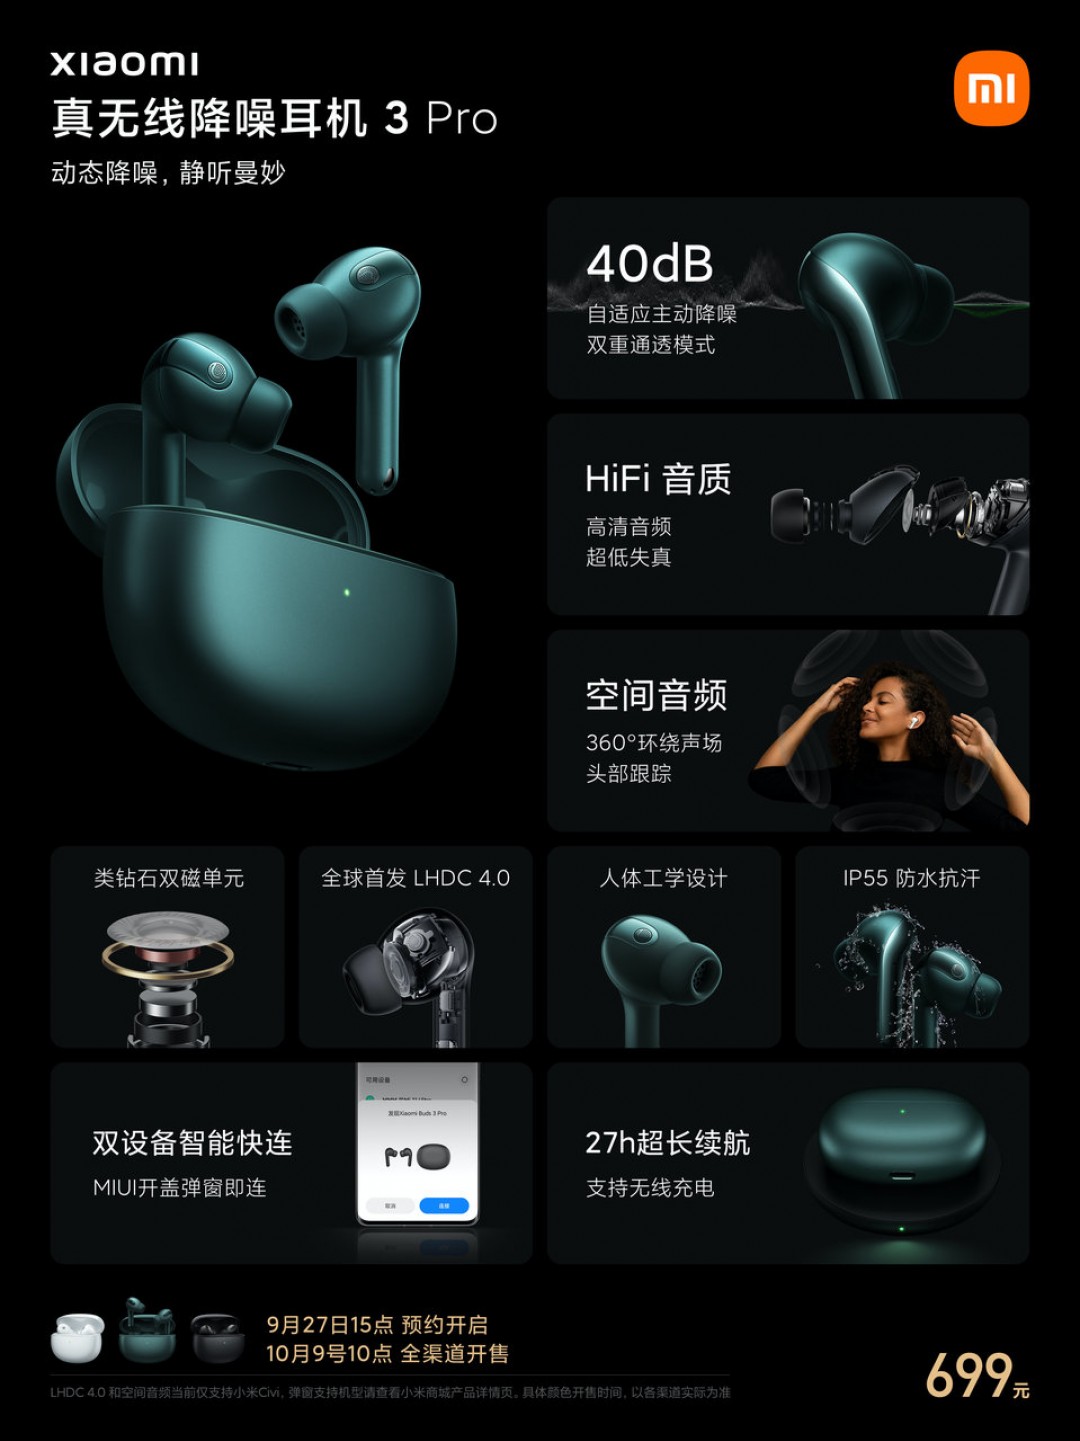 Xiaomi Watch 2 unveiled with third-party app, new TWS headset with 40 dB noise cancelling also launches